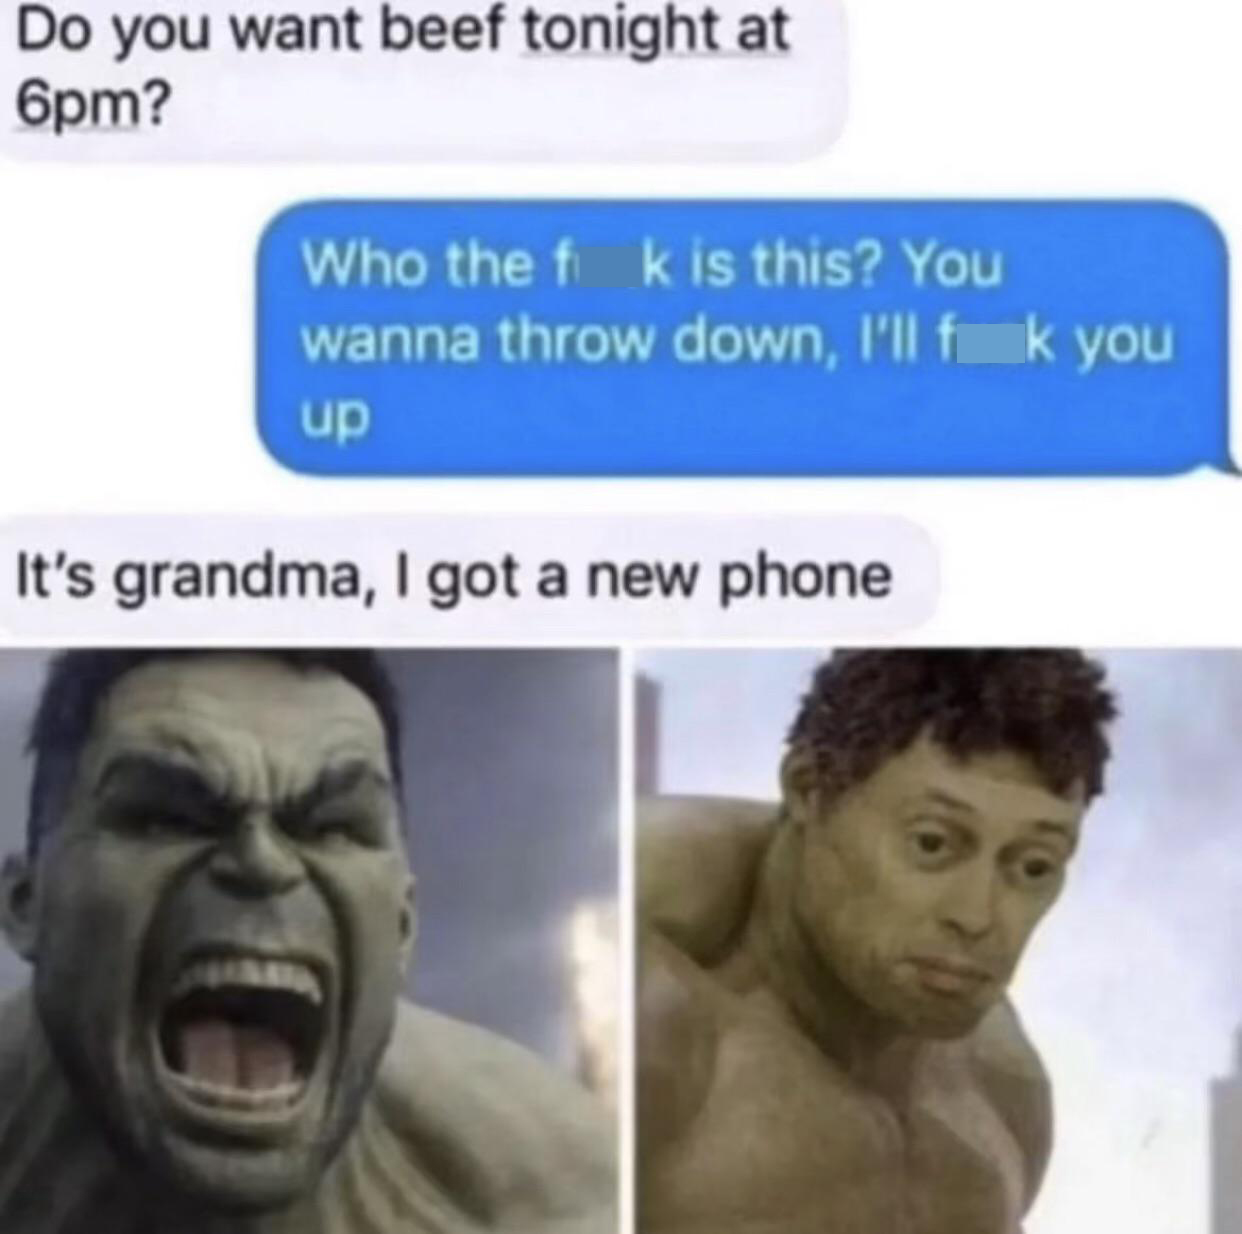 funny memes - dank memes - hulk meme - Do you want beef tonight at 6pm? Who the f k is this? You wanna throw down, I'll f k you up It's grandma, I got a new phone